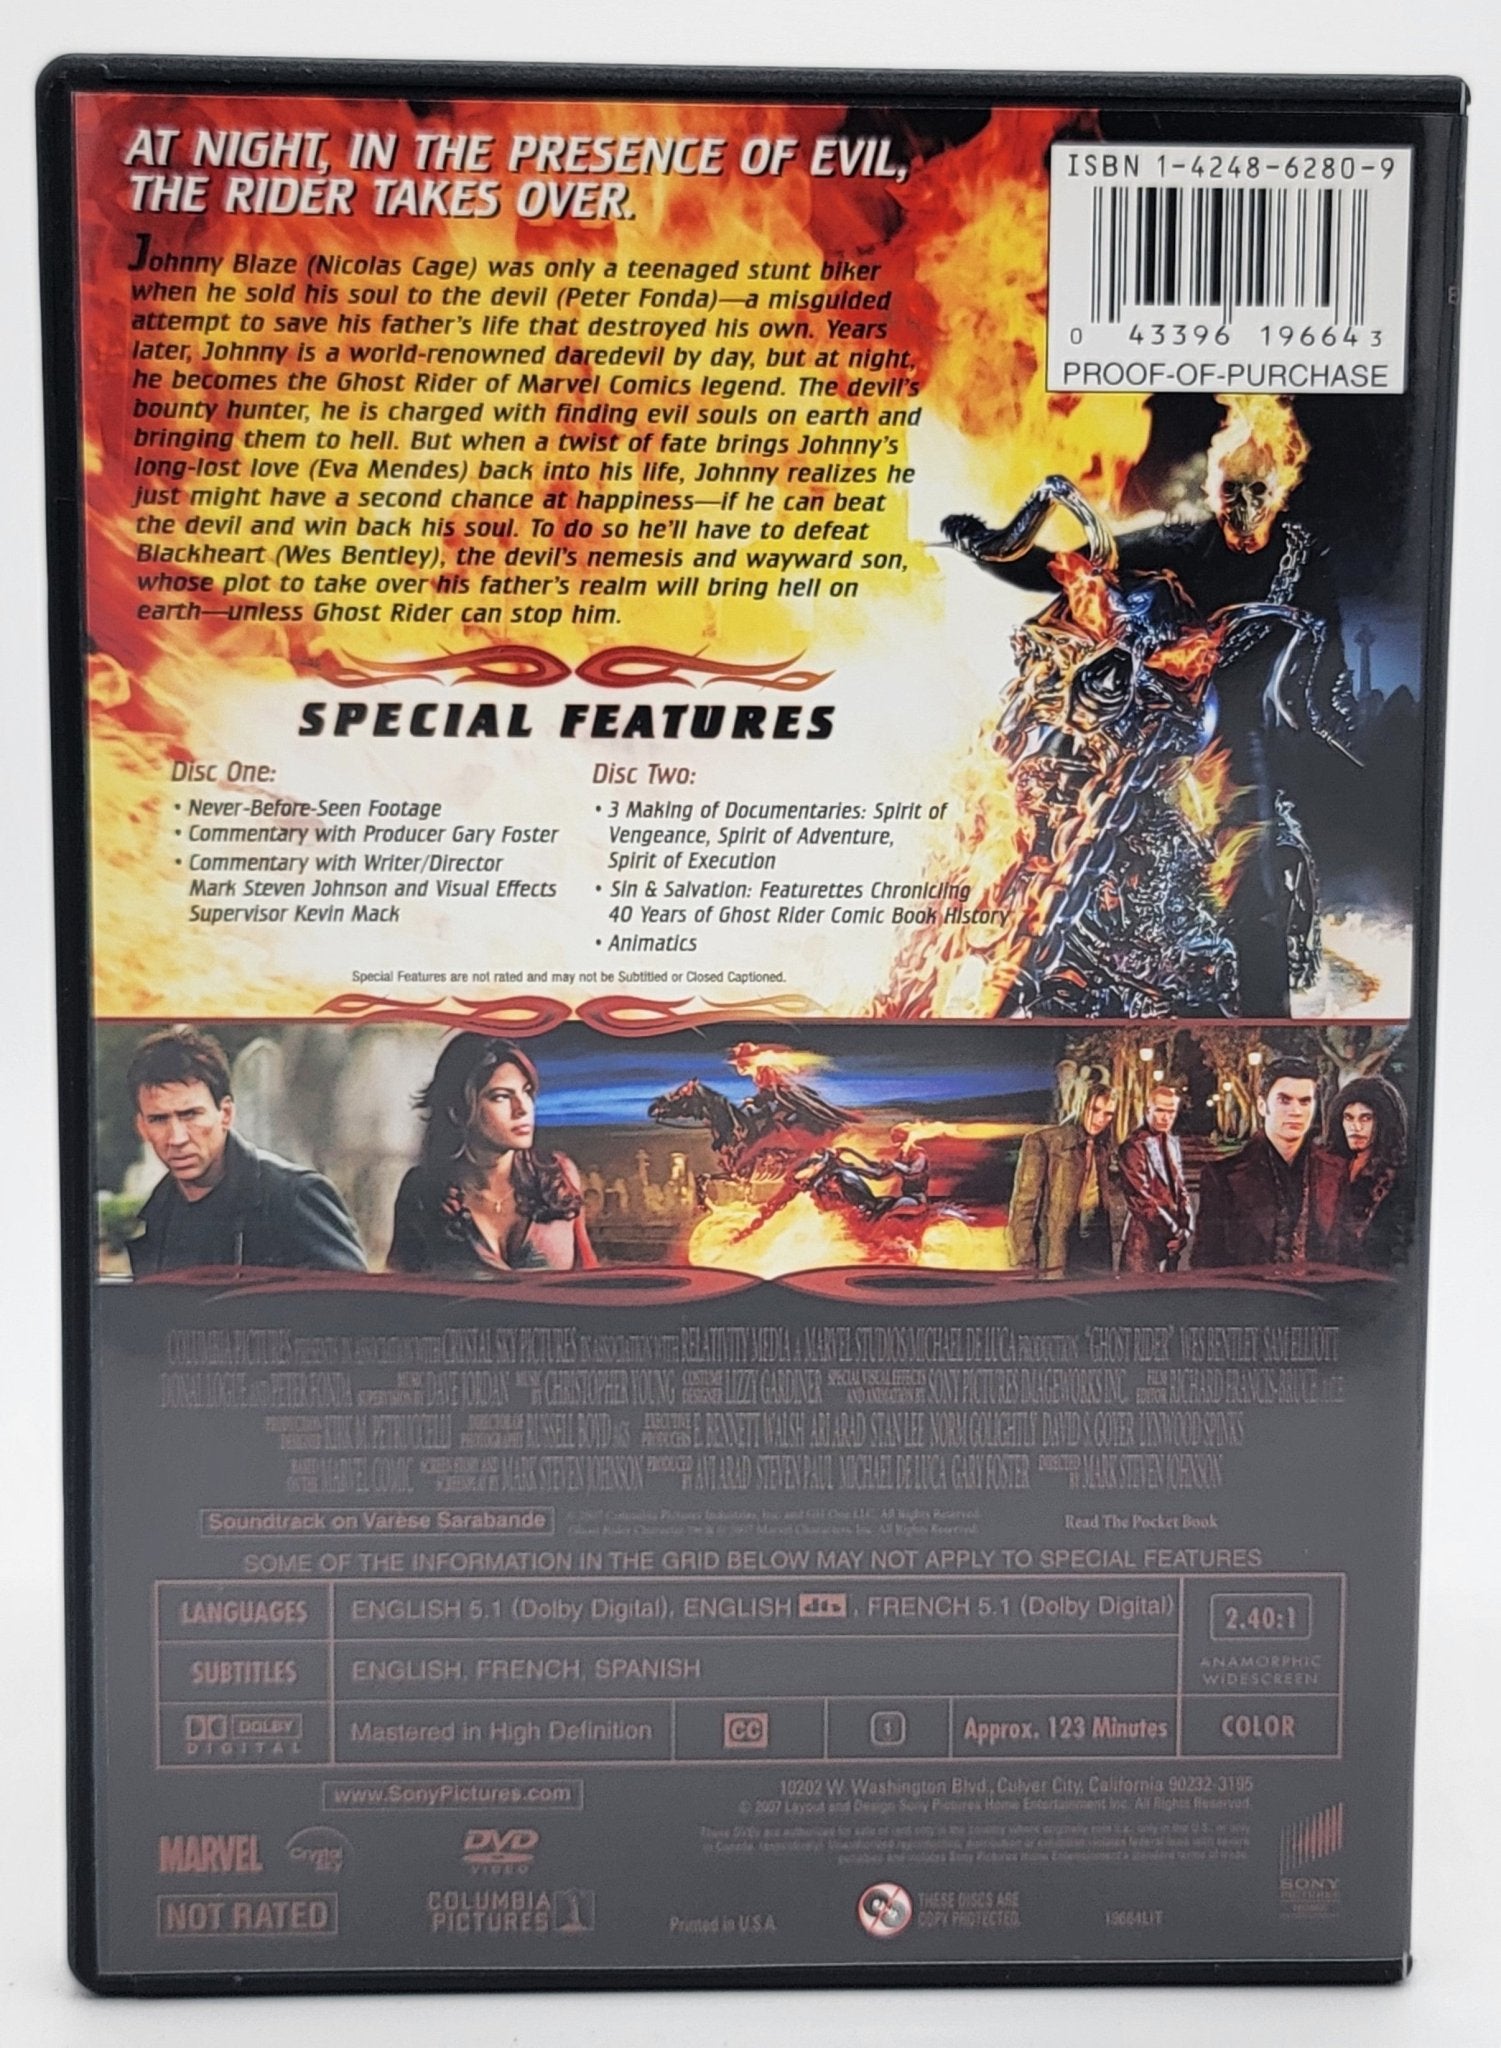 Sony Pictures Home Entertainment - Ghost Rider | DVD | 2 Disc Extended Cut | Widescreen - DVD - Steady Bunny Shop